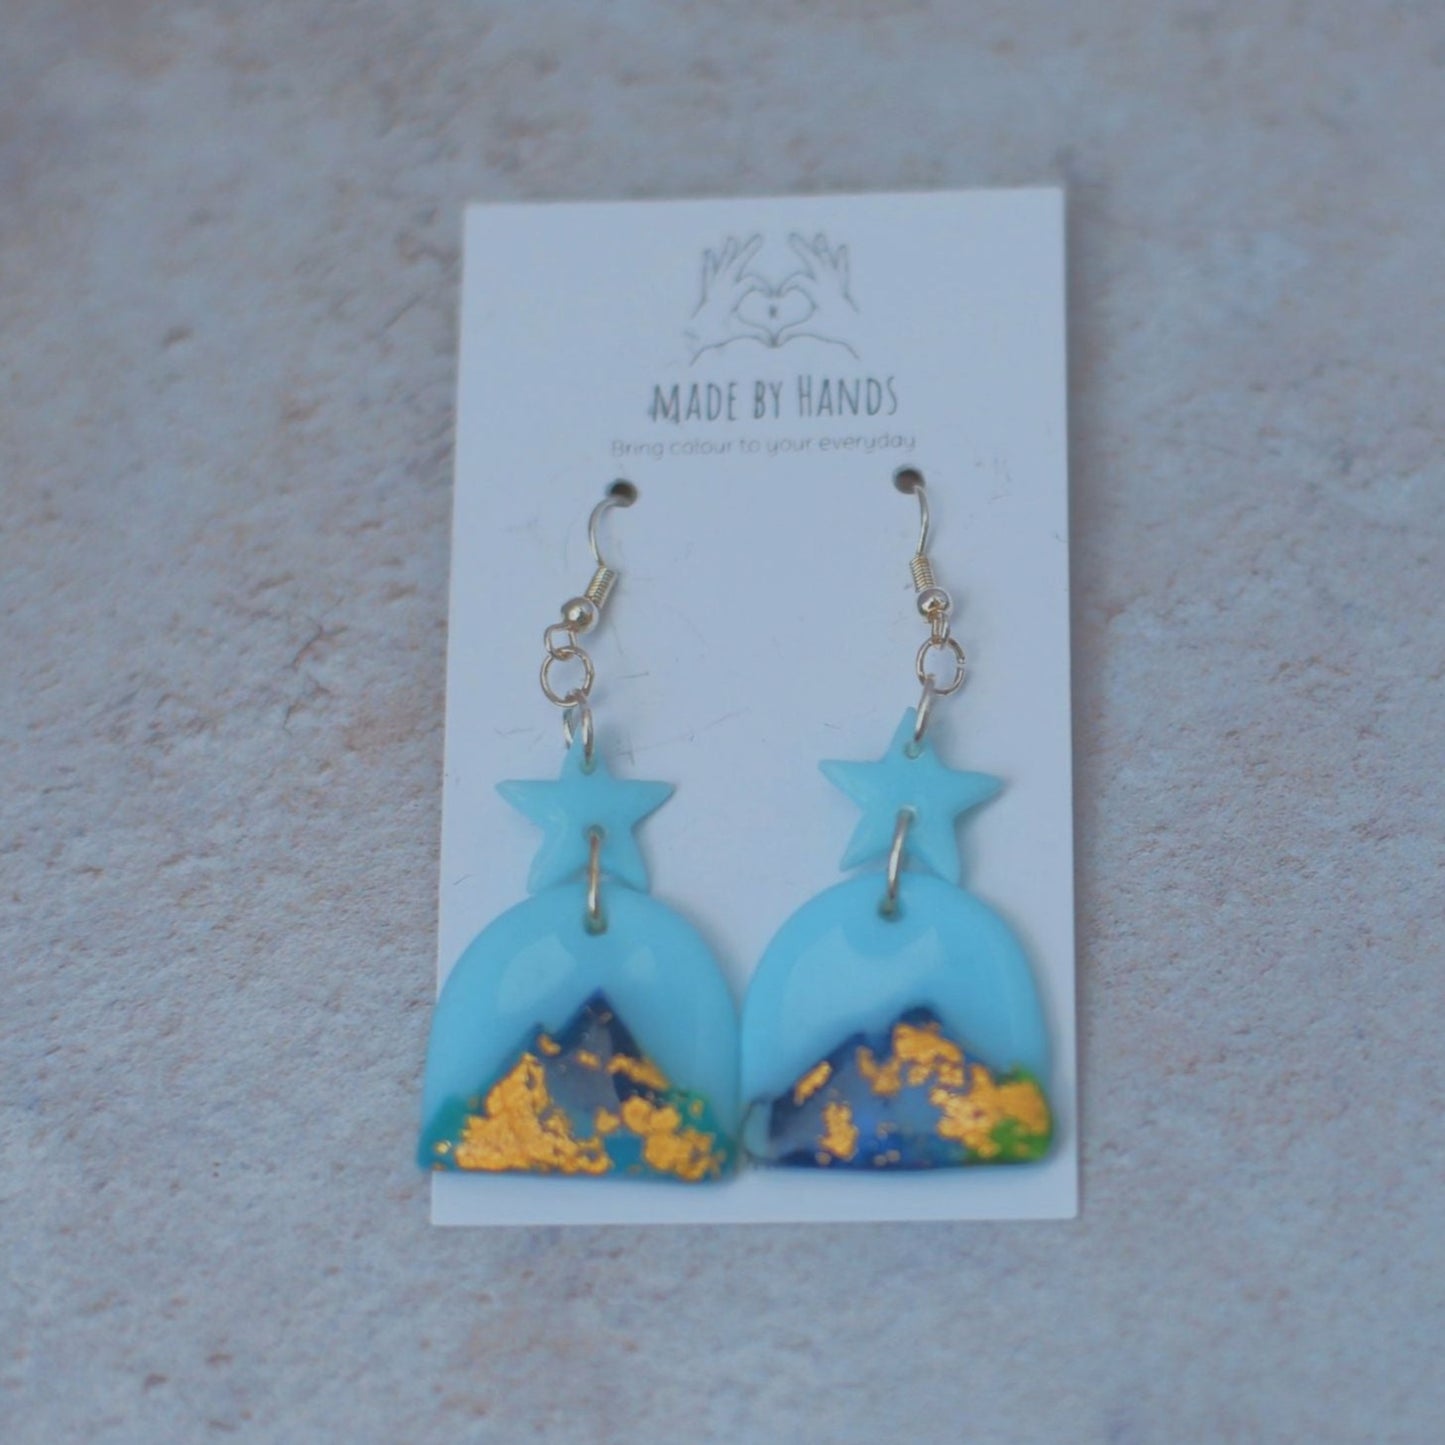 Canopy & Stars Earrings - Gold leaf mountain earrings - polymer clay earrings - mountains - adventure inspired gifts